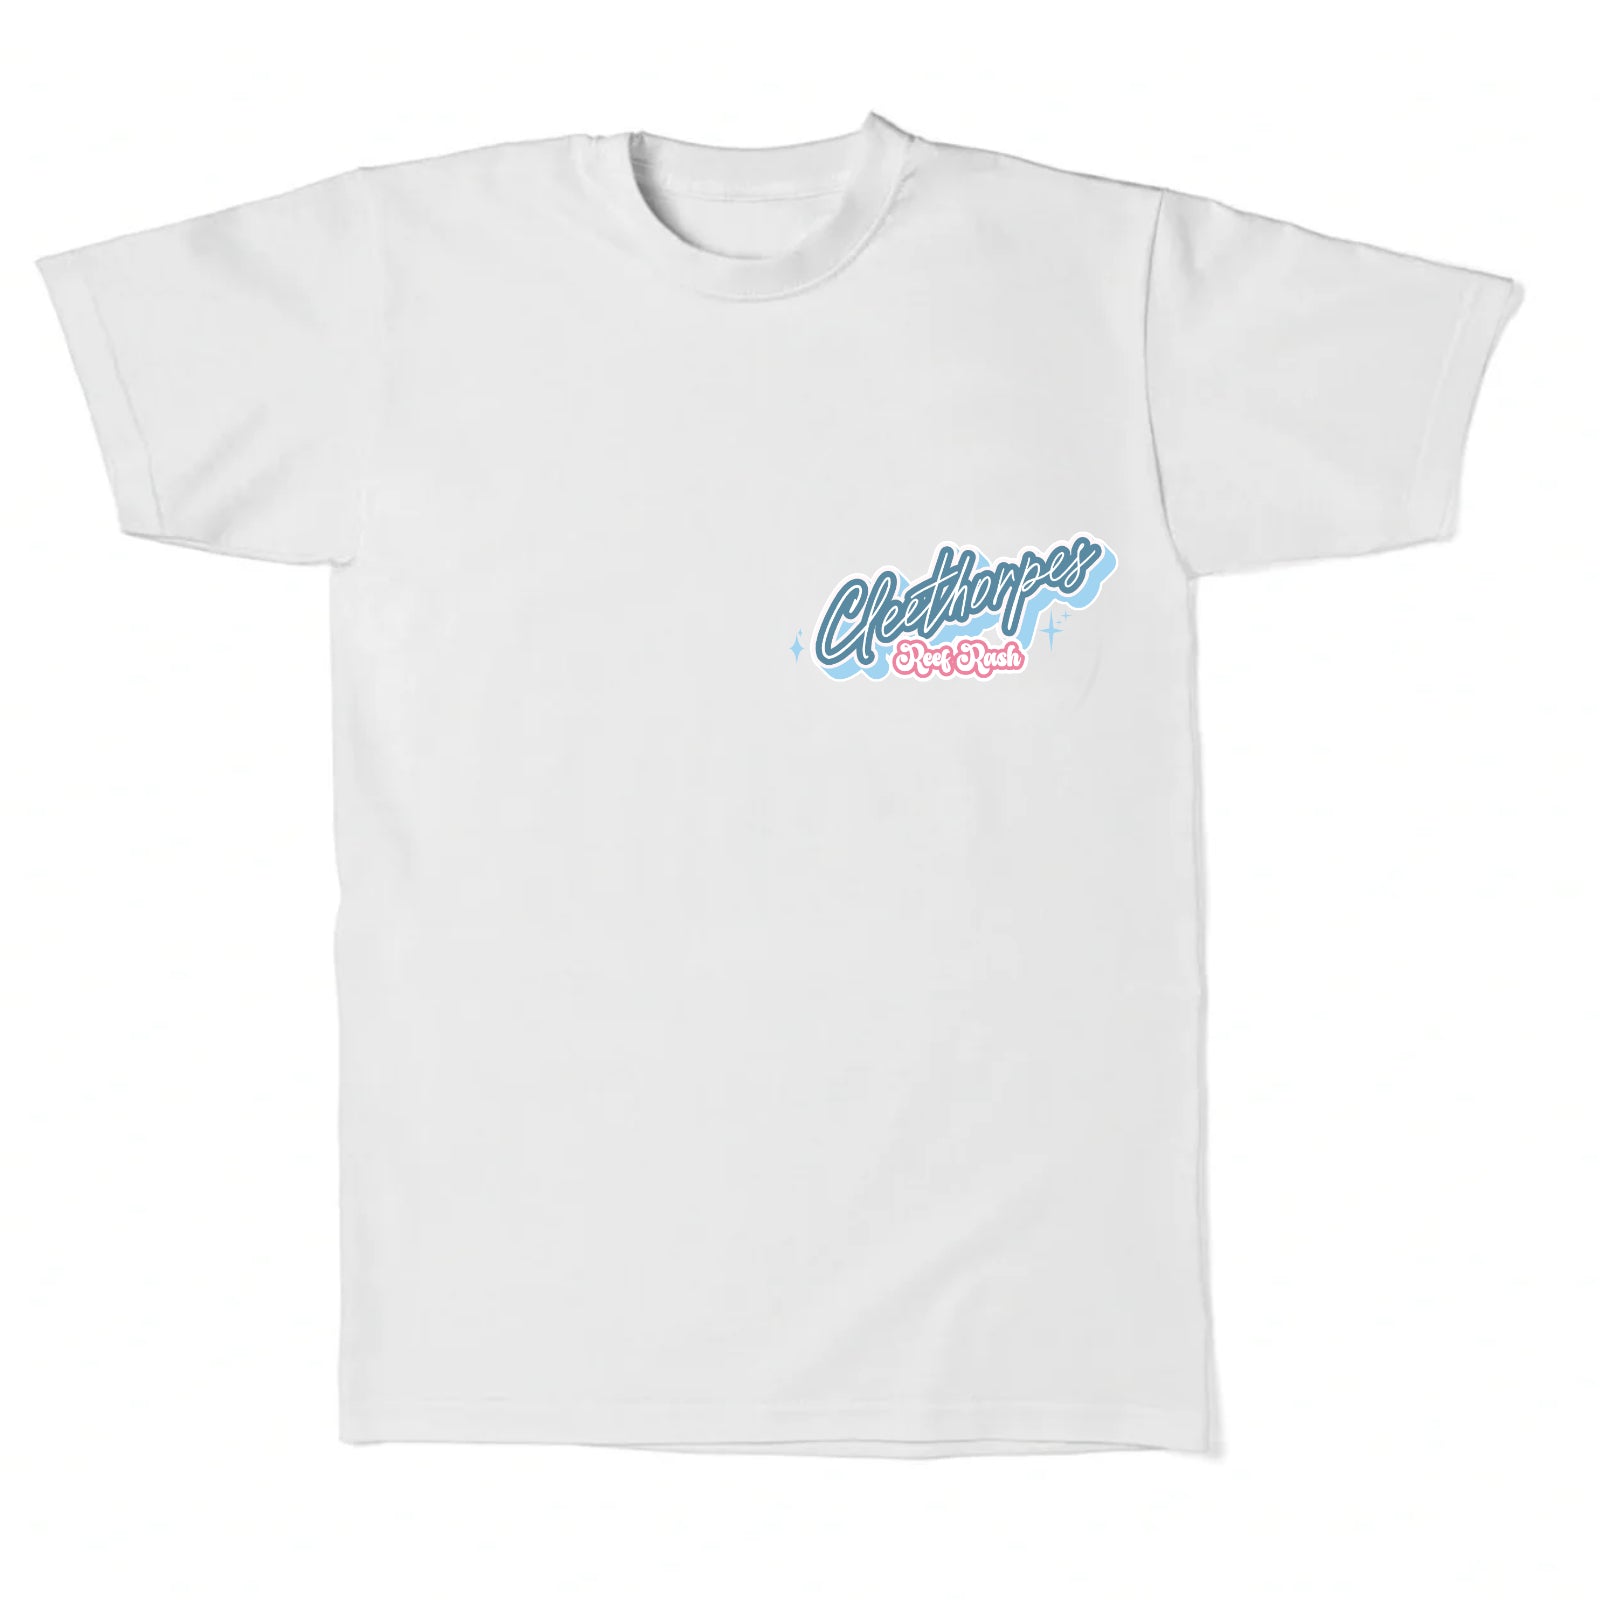 CLEETHORPES MOUSE AND MOON KIDS T-SHIRT - WHITE -